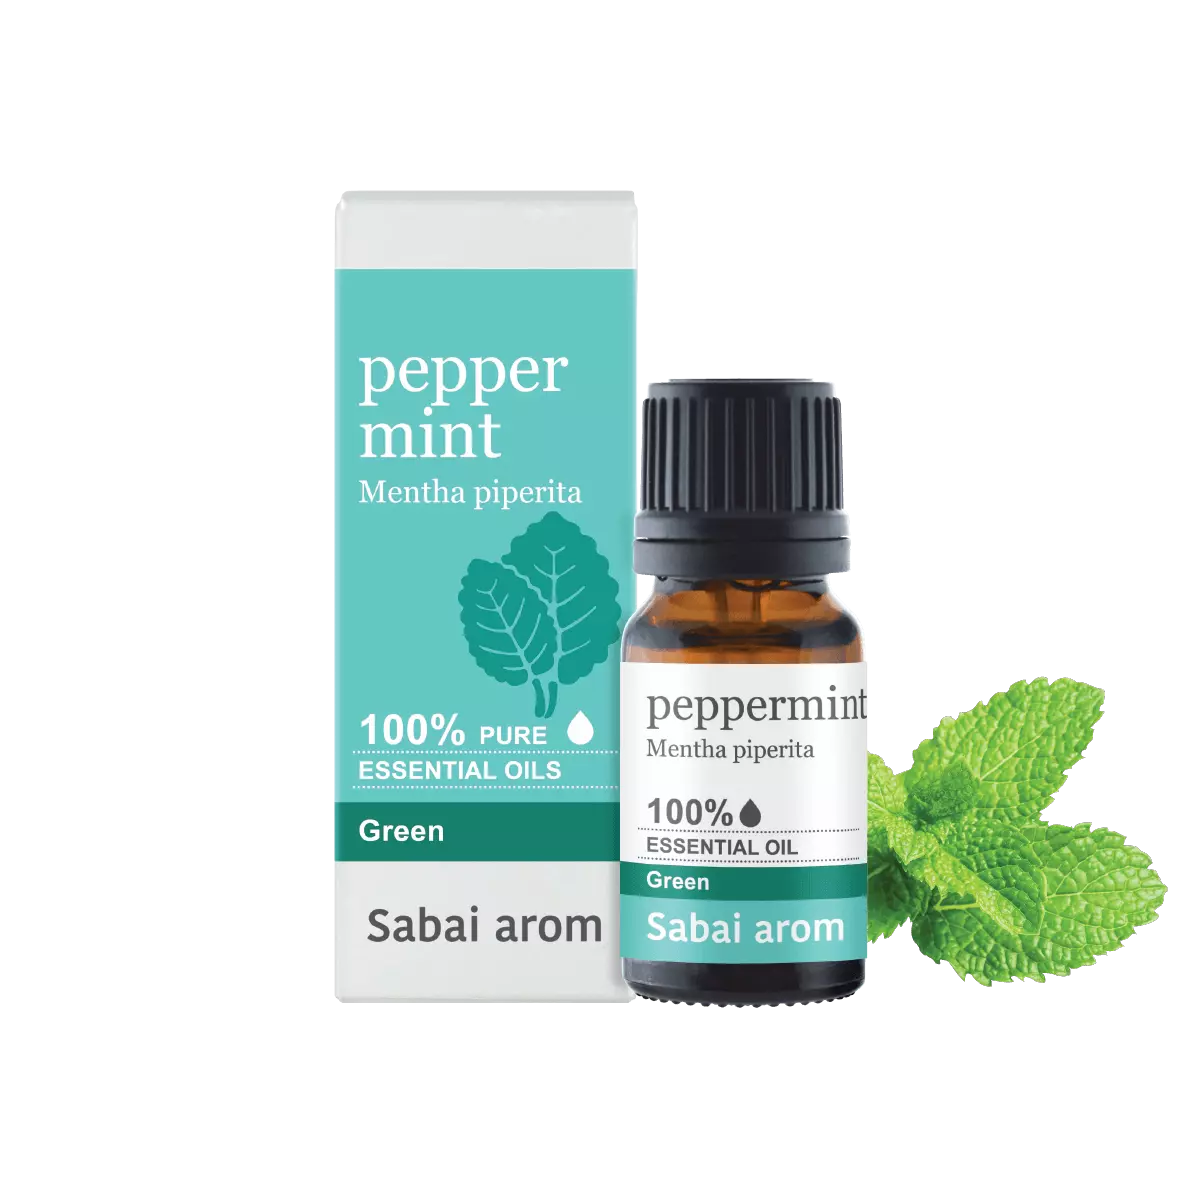 essential oil peppermint <h2>100% Pure Essential Oil</h2> <em><strong>Mentha Piperita</strong></em> <strong>Source : </strong>England Peppermint is one of the most beloved and multi-purpose essential oil next to Lavender oil, and is used widely in cosmetic, consuming products and perfumery. The invigorating and minty aroma comparable to menthol of Peppermint is cherished by many for its wide range therapeutic benefits. It can impel negative moods and nervous disorders, while energizing one to move forward with positivity. Physically, when used with carrier oil, it can heal digestion and abdominal discomfort and relieves sore muscles. If you have respiratory issues like stuffy nose, Peppermint oil will unblock the congestion and help you breathe easier. <strong>Scent : </strong>Strong penetrating, fresh, sweet, medicinal and herbal note. <strong>Family : </strong>Fresh Herbal <strong>Note : </strong>Top